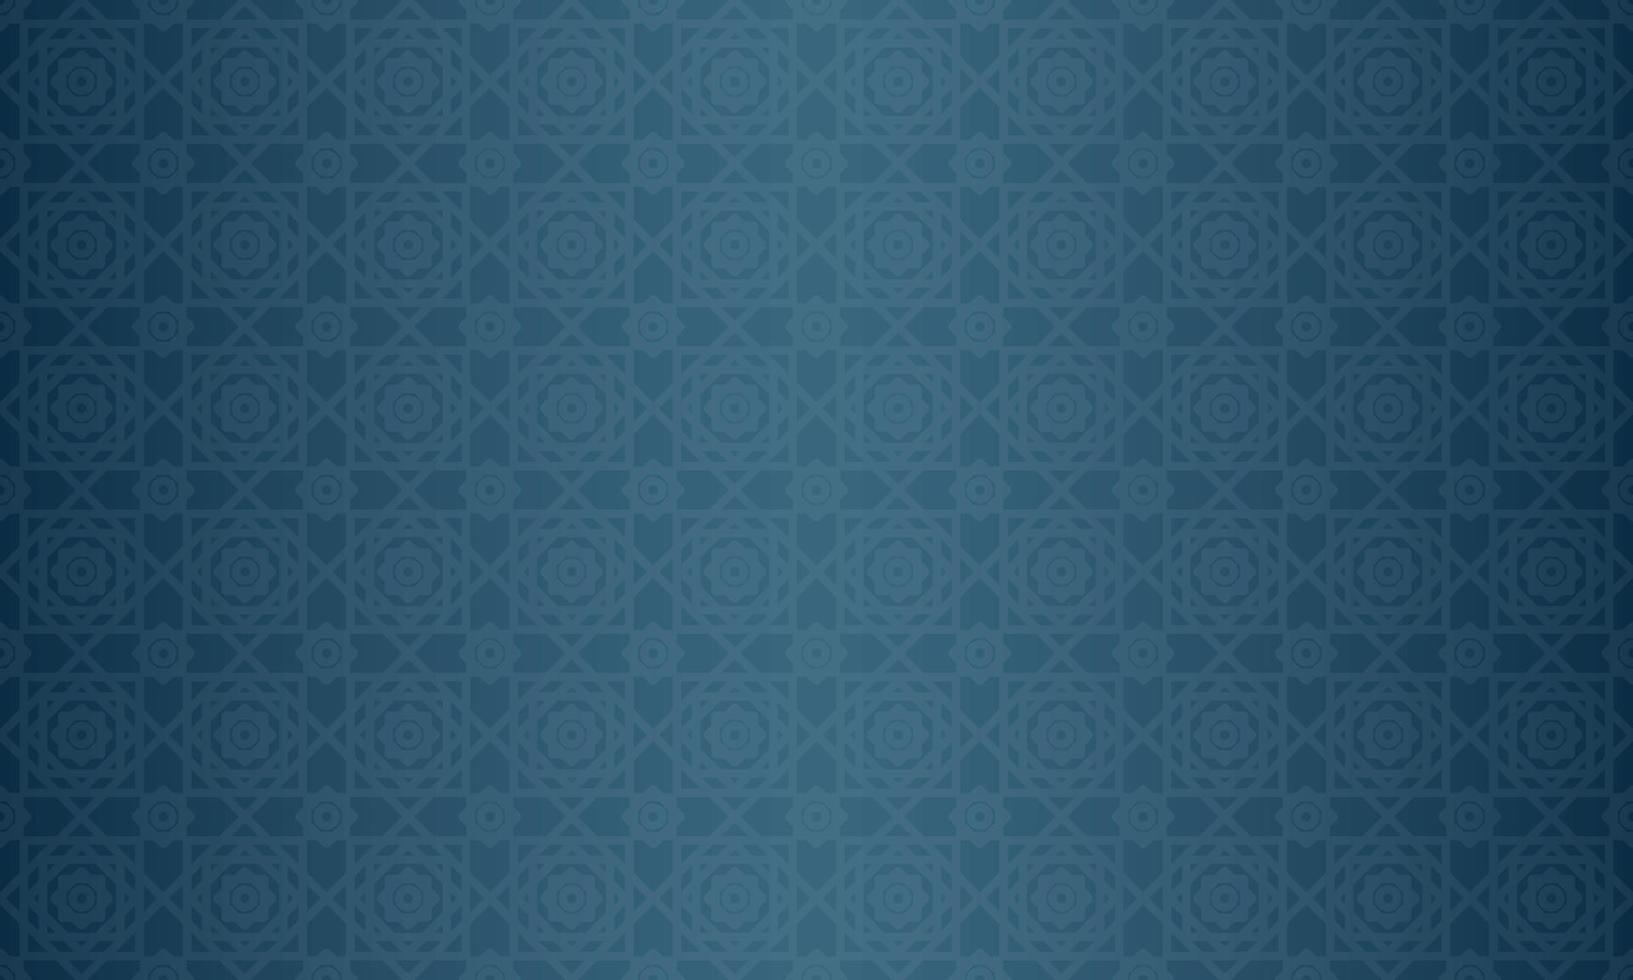 Arabic traditional motif texture background. Elegant luxury backdrop vector with Islamic themed decorative ornament pattern. Blue gradient with geometric lines and repeating rectangles.